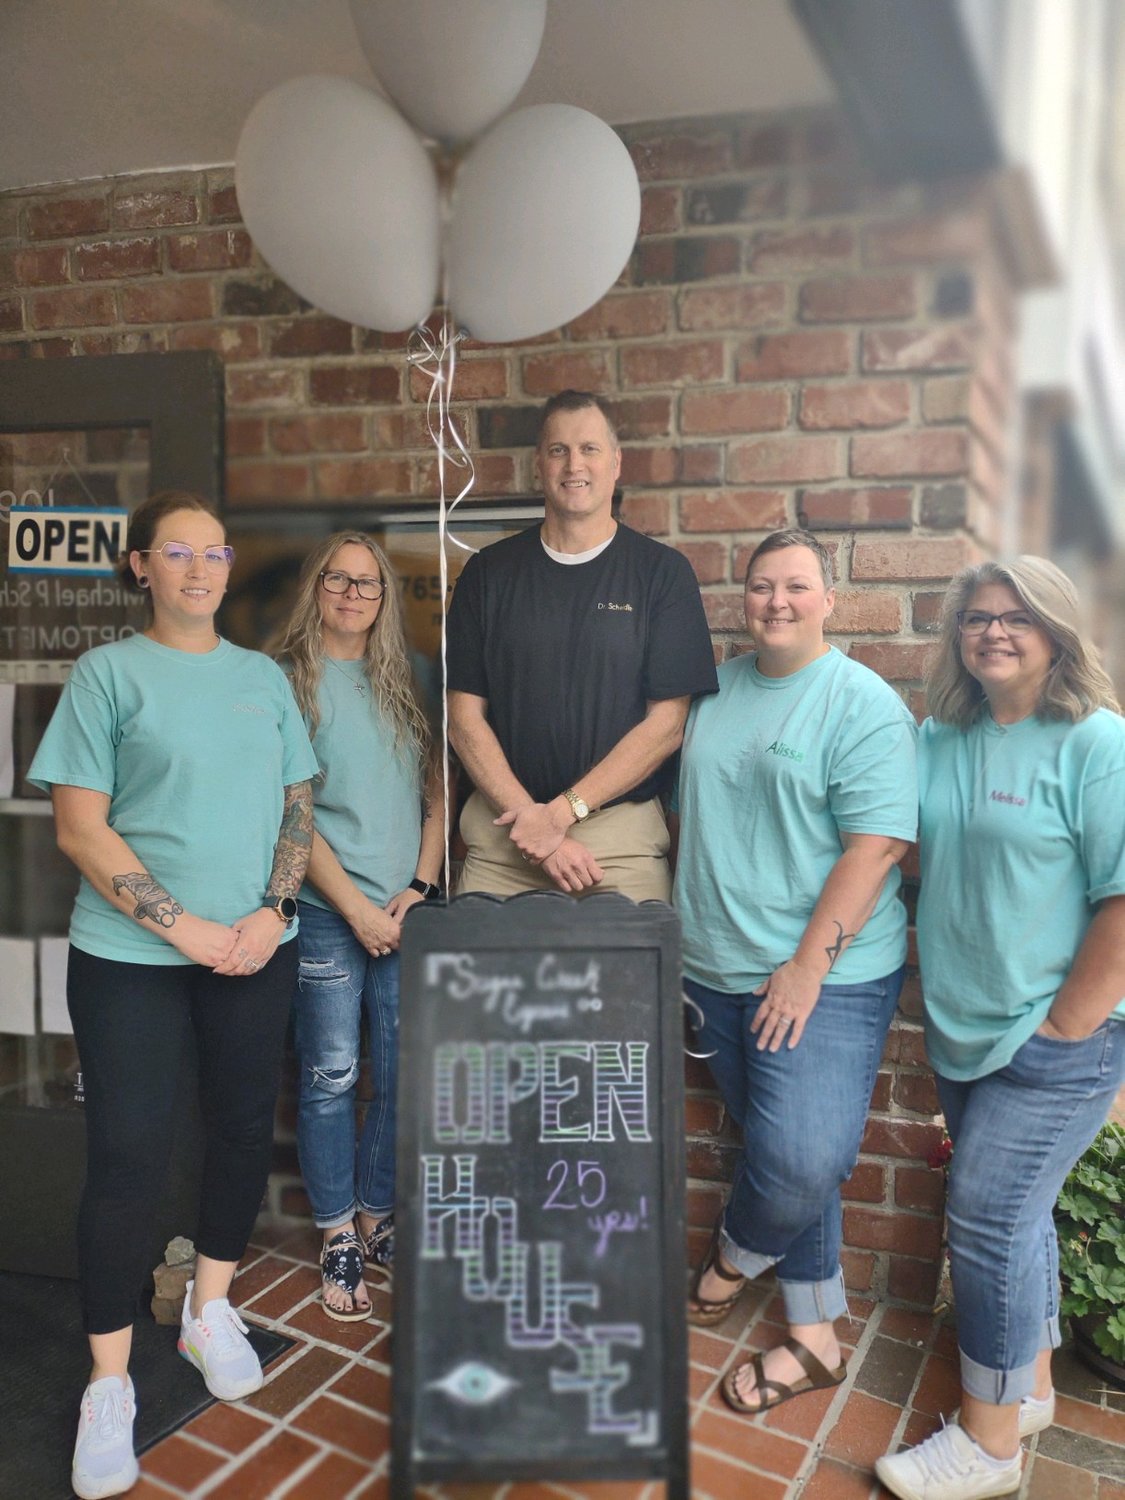 Dr. Michael P. Scheidler, center, poses with members of his office staff, from left, Heather Heckman, Mirah Merschon, Alissa Nicoson and Melissa Stribling during an open house celebrating his 25 years in business at 109 E. Main St.